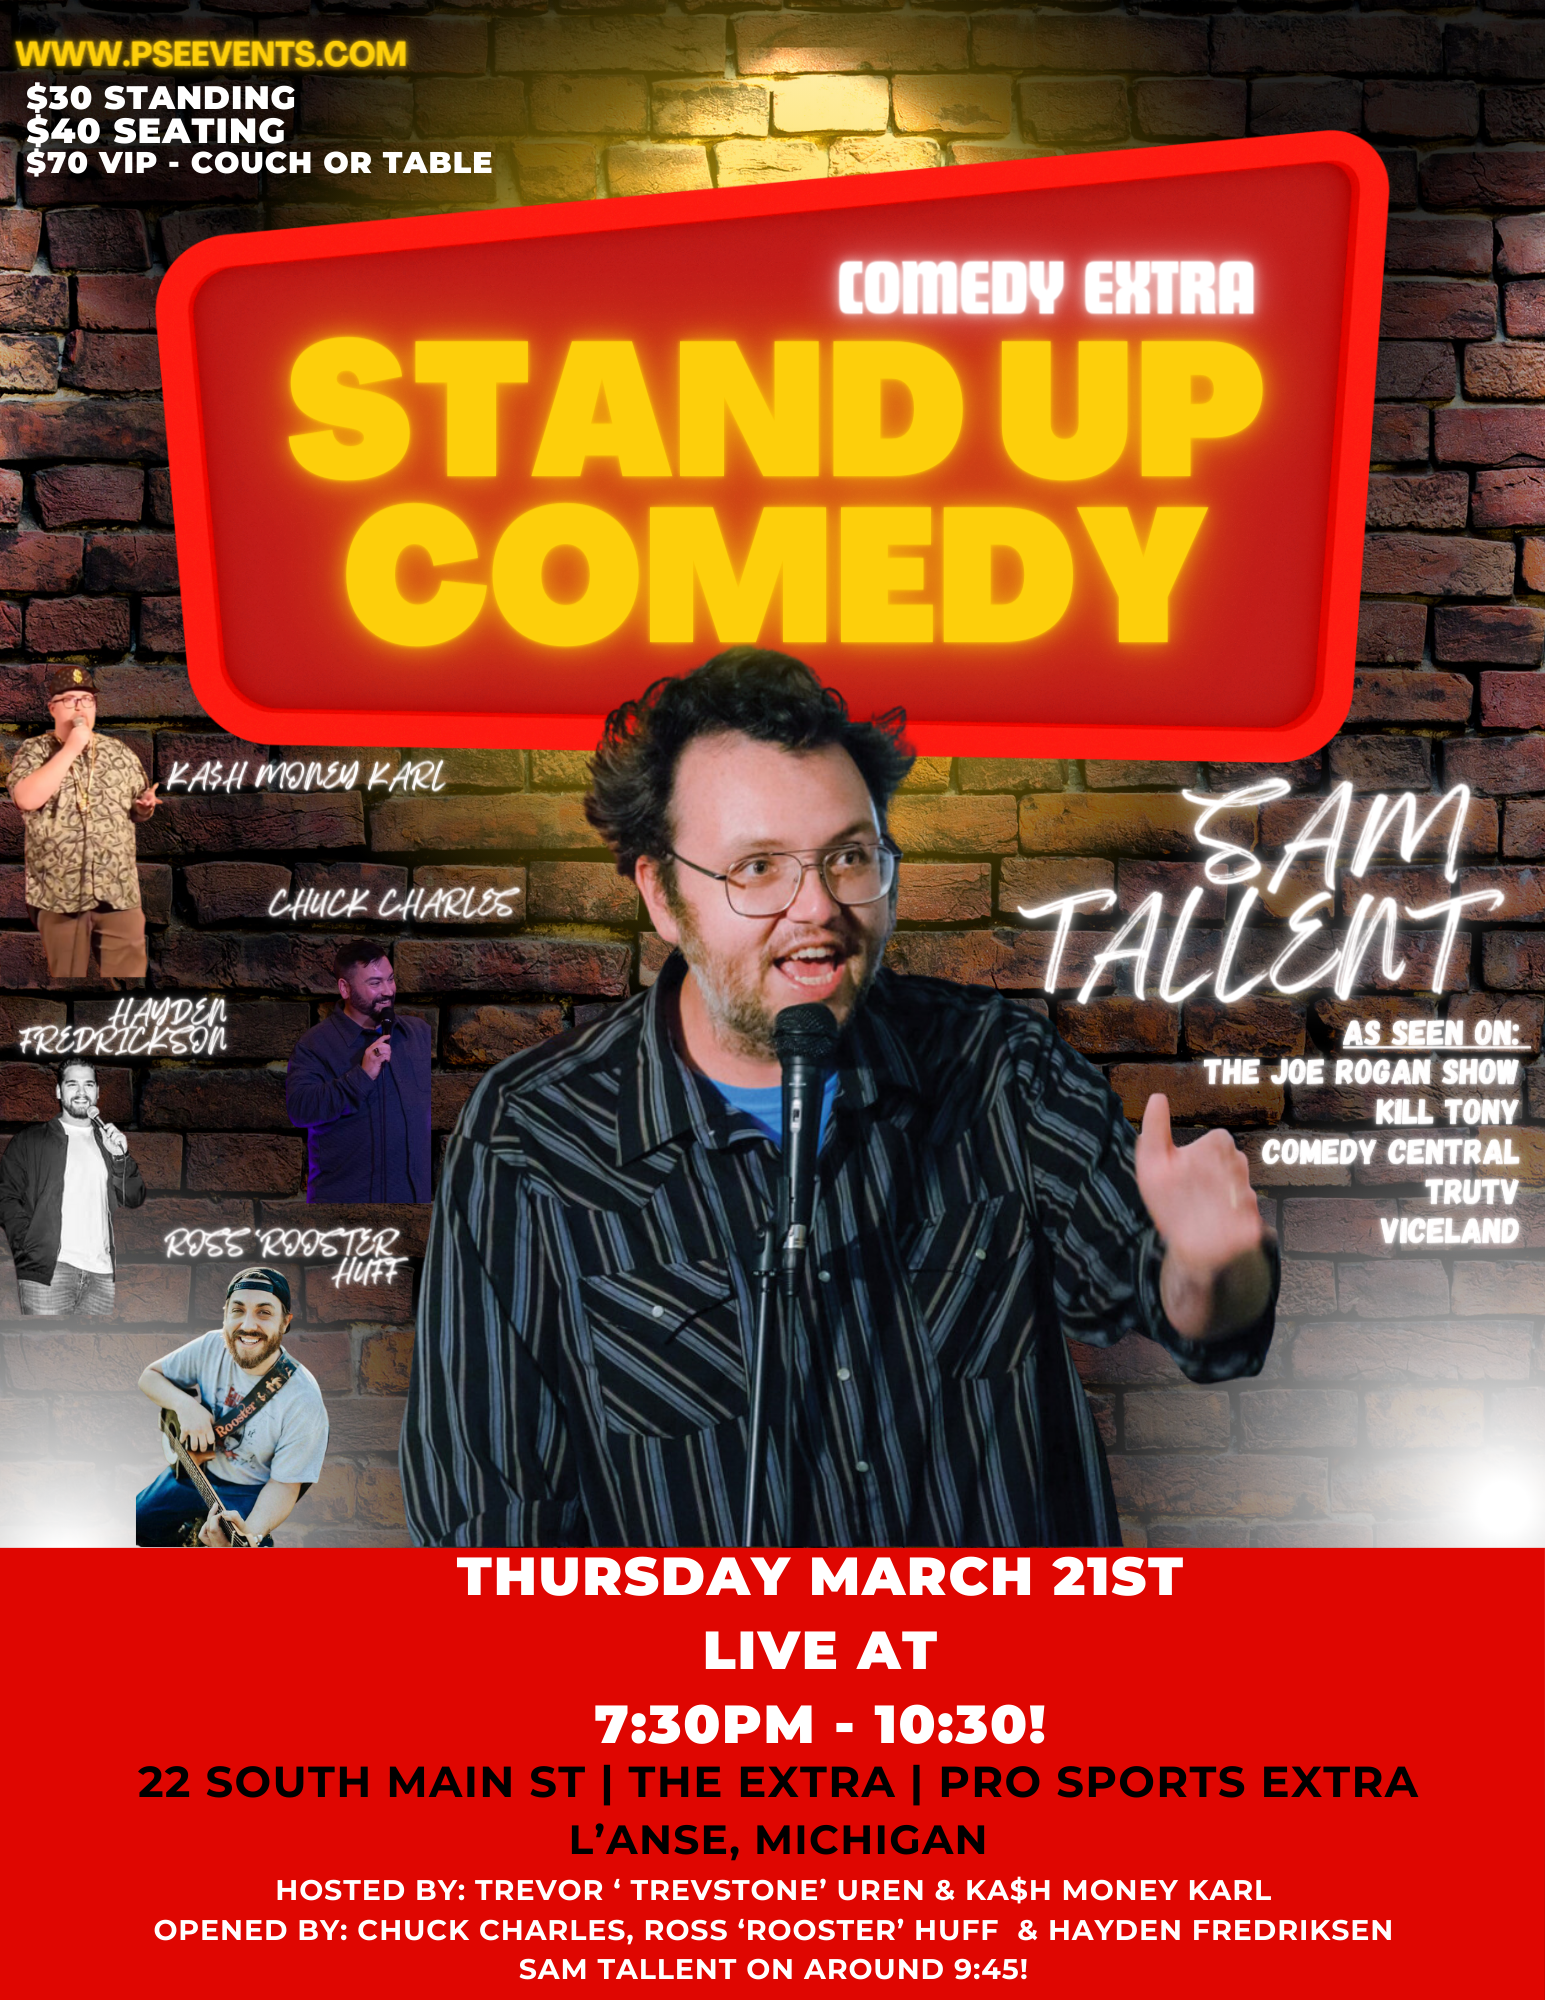 What To Know About Comedian Sam Tallent Coming To L’Anse, Michigan On March 21st